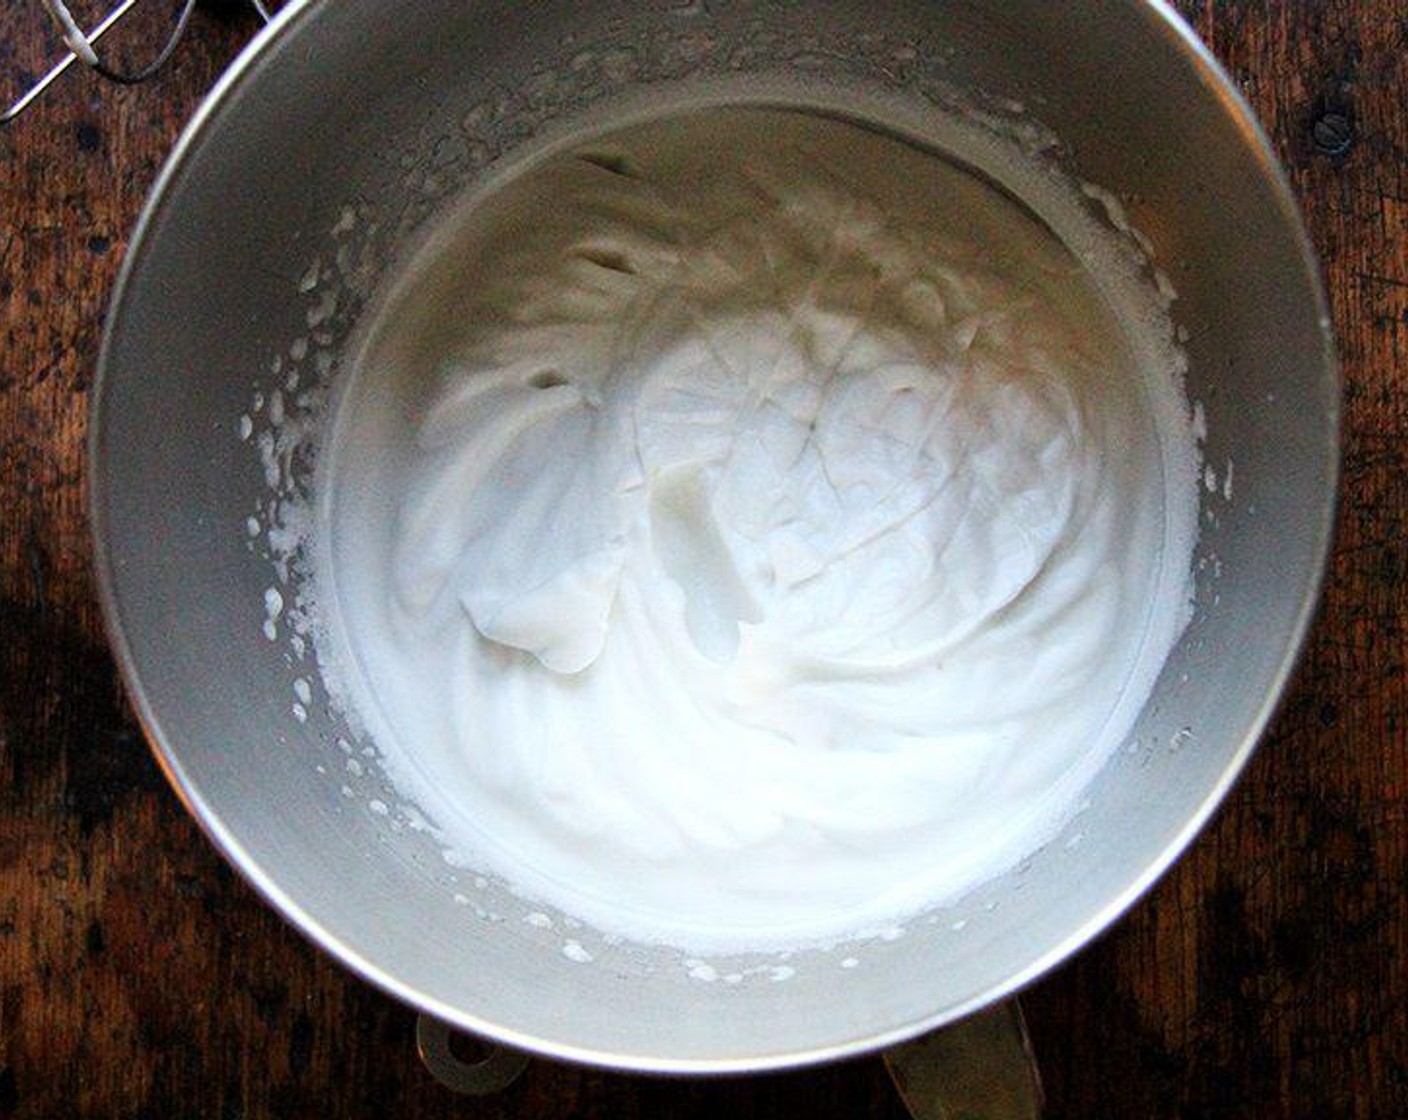 step 1 Drain the Canned Chickpeas (2 cups) and put 200 milliliter of the chickpea water in the bowl of a standard mixer. Add Cream of Tartar (1/4 tsp), Salt (1/4 tsp), Powdered Confectioners Sugar (1/4 cup). Beat on medium high speed for 15 minutes. After this, the liquid should have tripled in volume, and it should be able to hold stiff peaks.